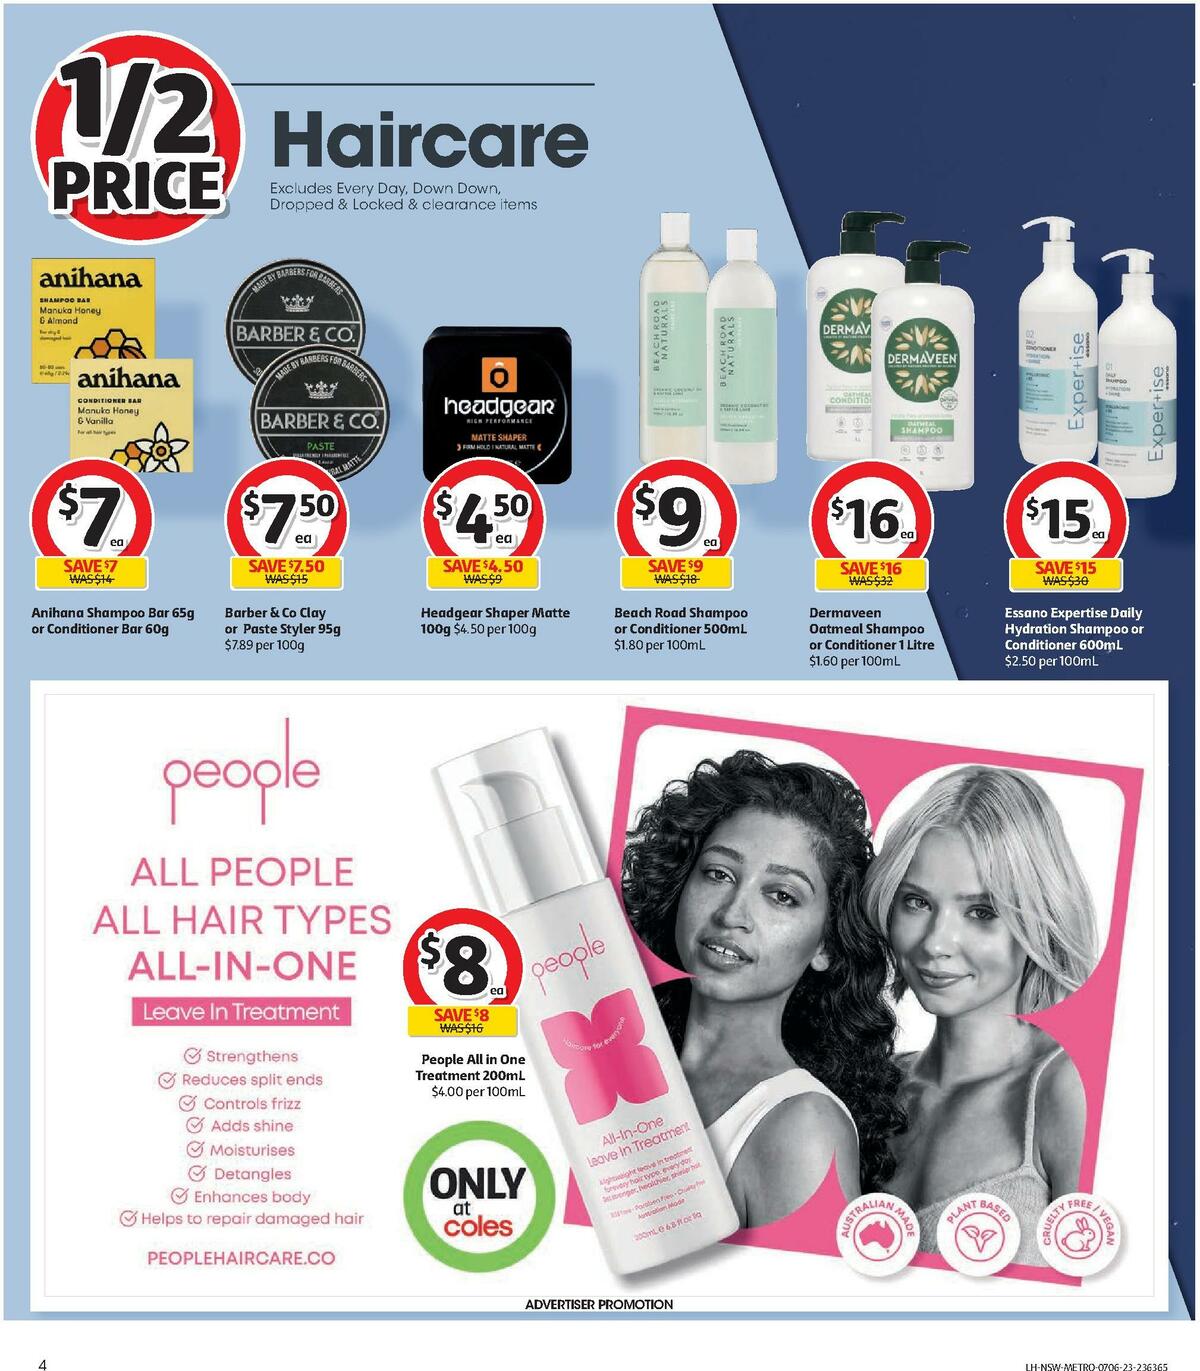 Coles Health & Beauty NSW METRO Catalogues from 7 June